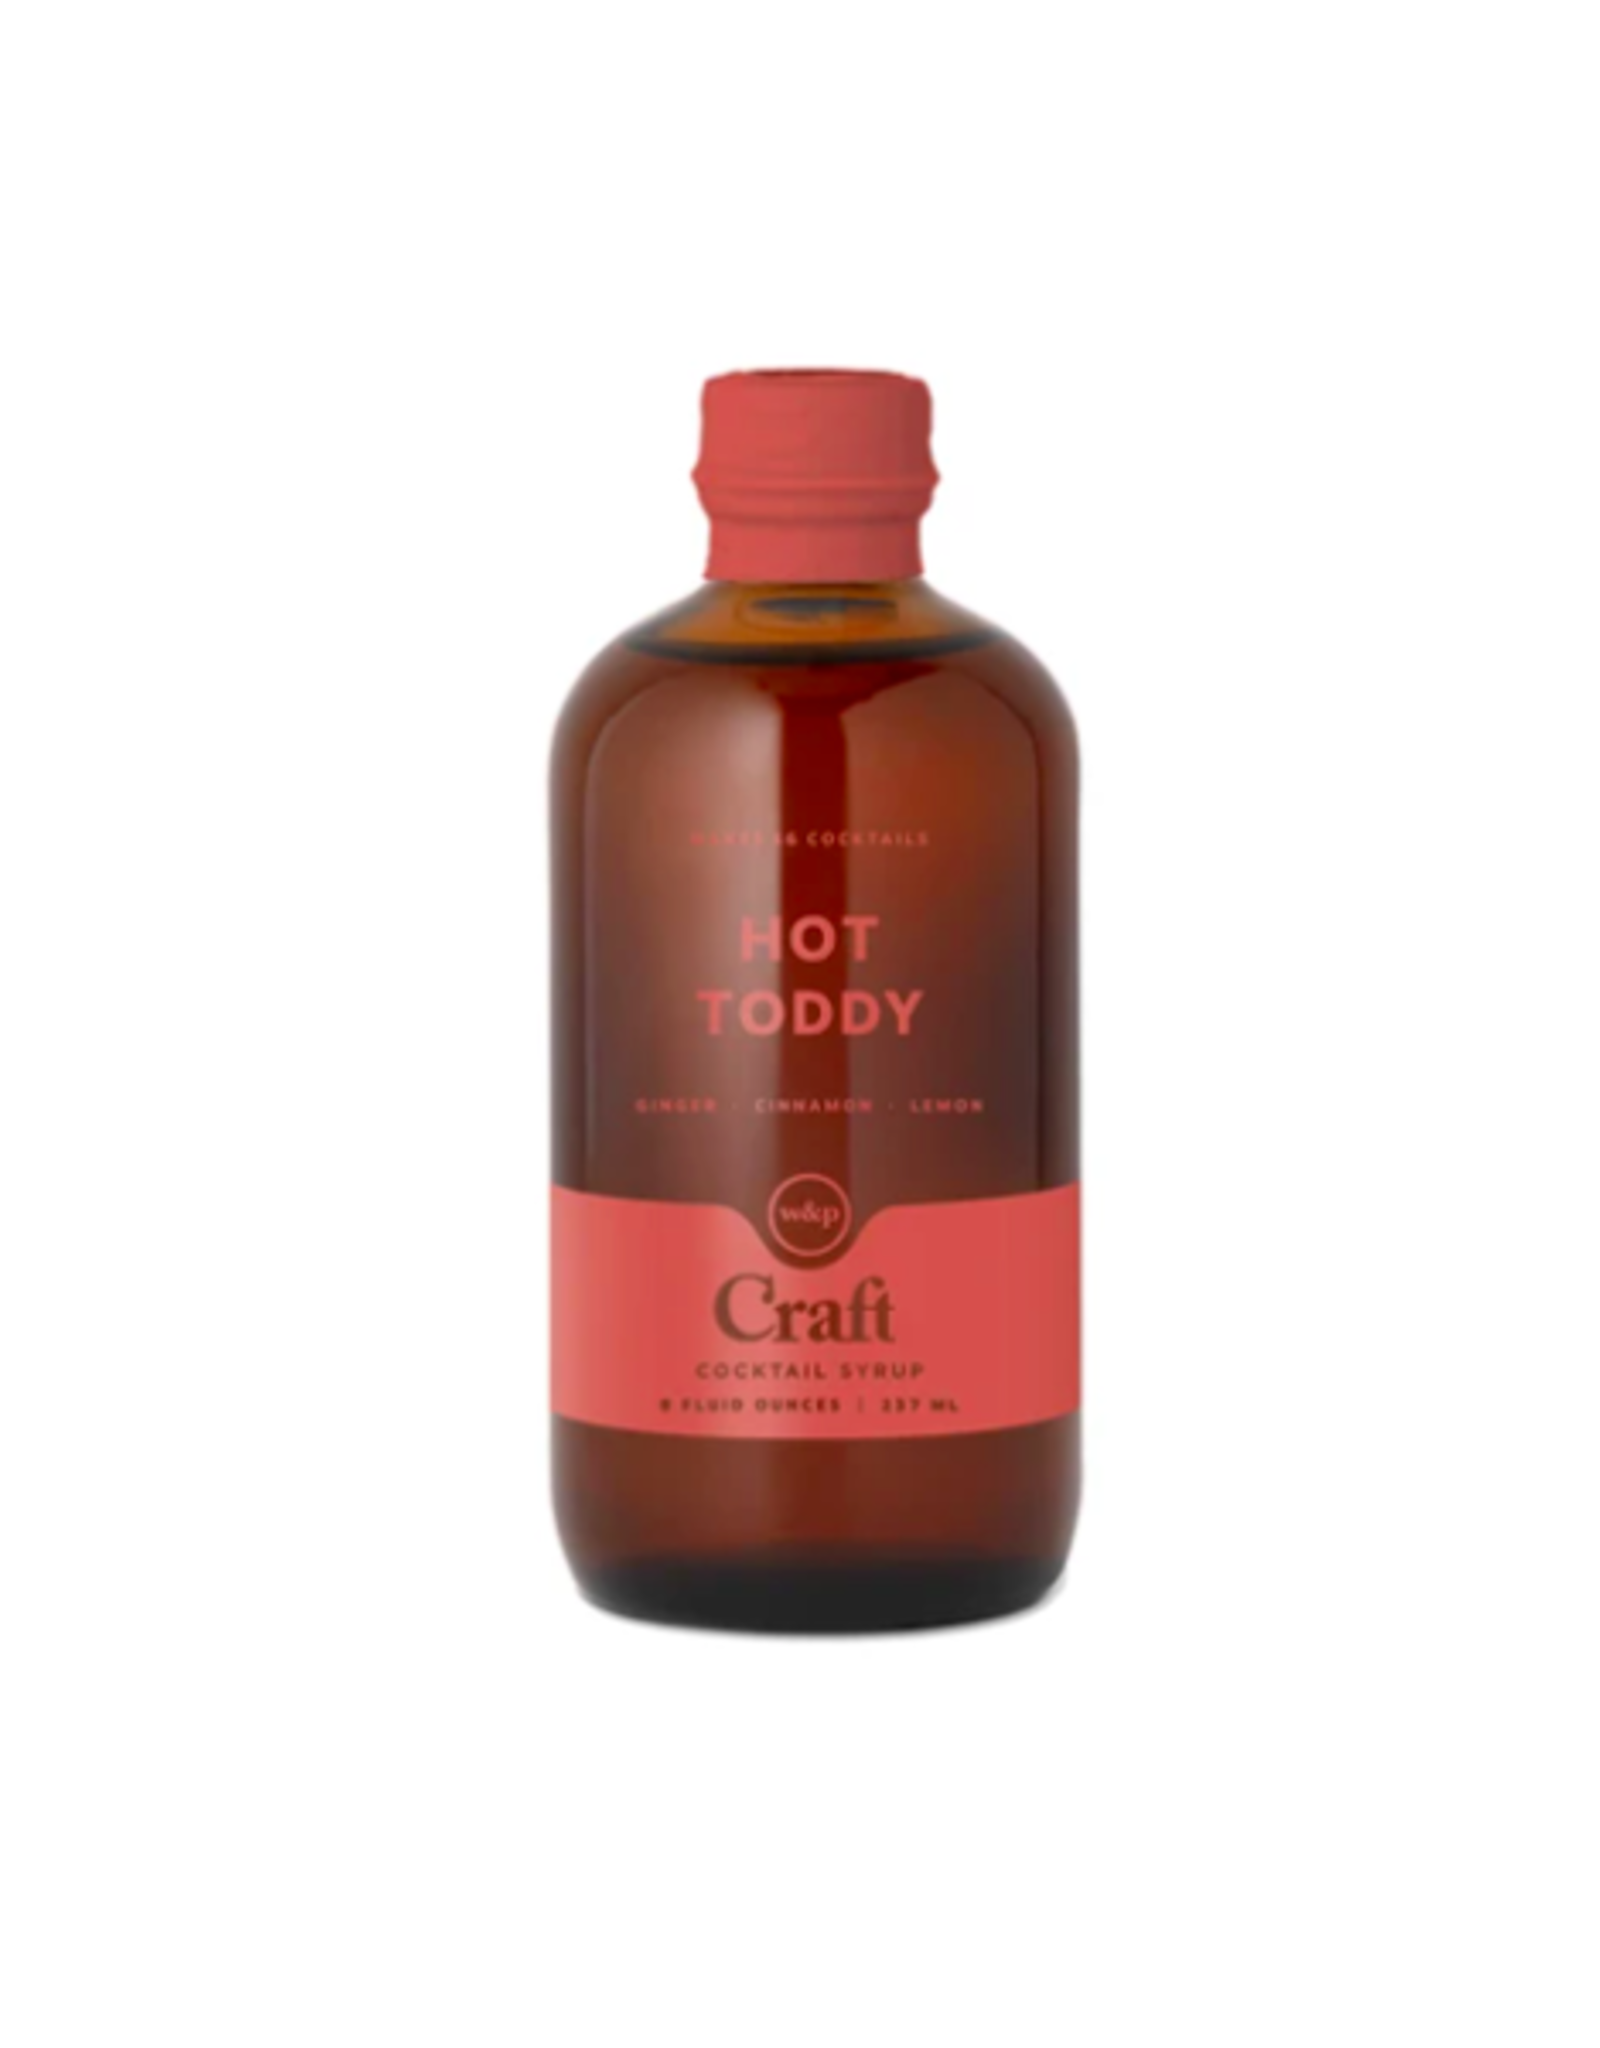 W&P - Cocktail Syrup / Hot Toddy, 8oz